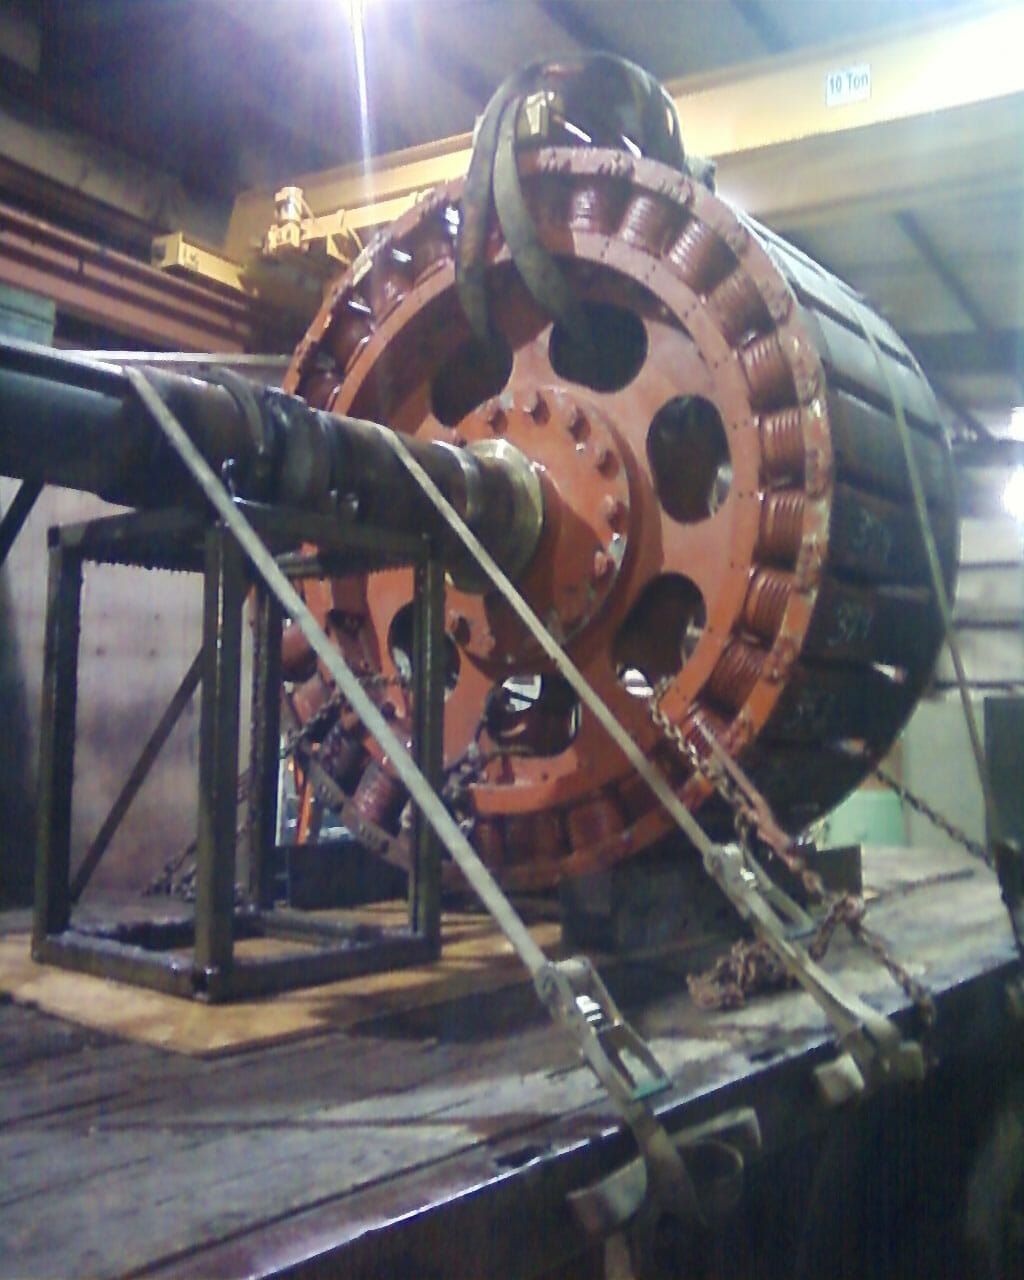 5000 Hp Synchronous rotor secured with cables to a platform, ready for repair